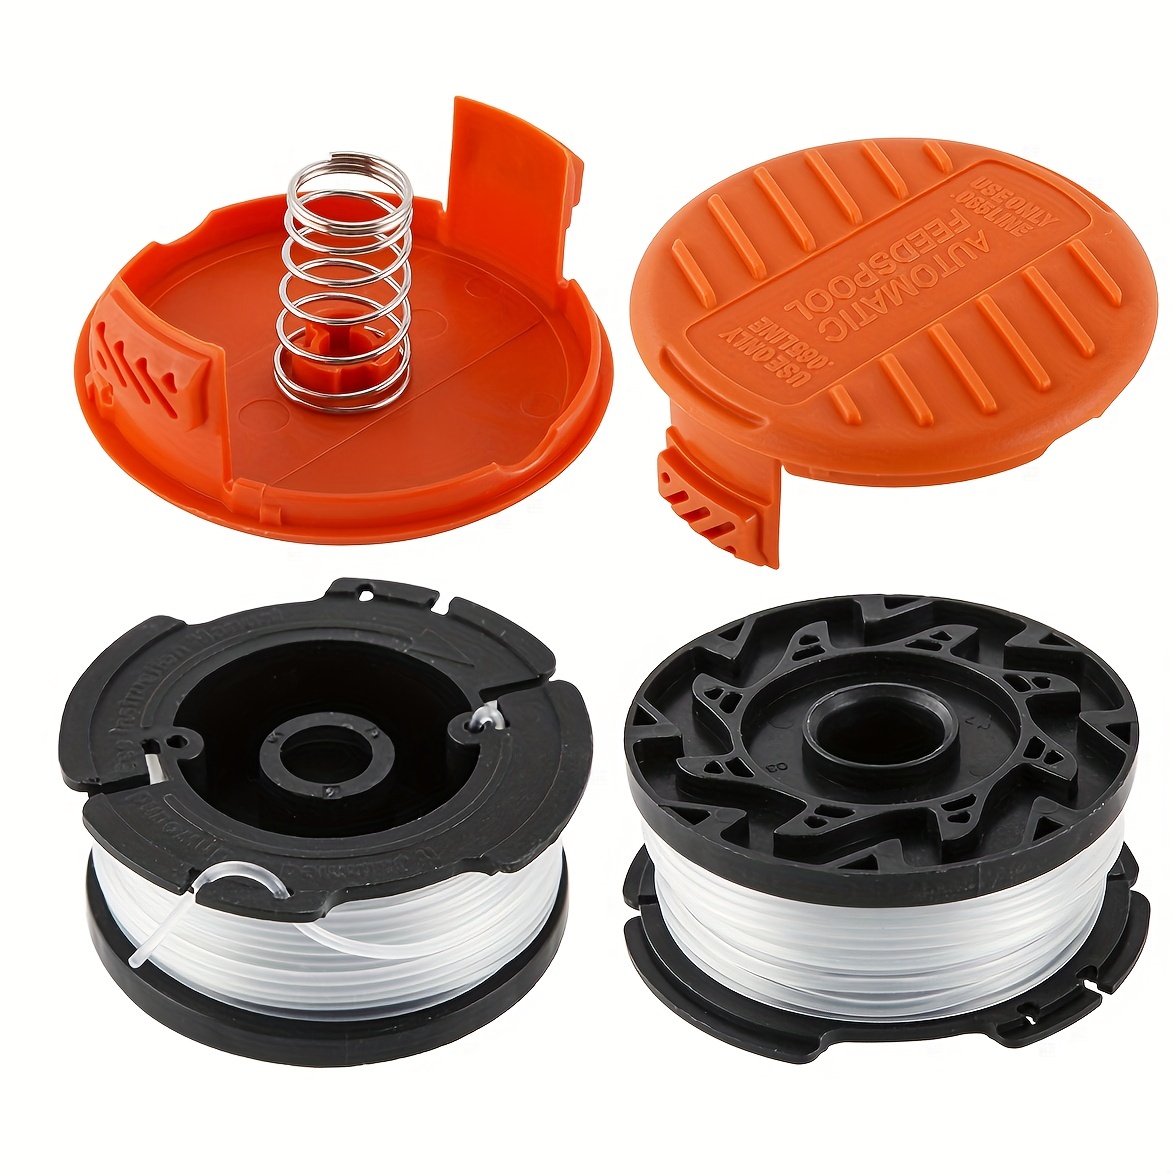 Riselion Trimmer Spool Compatible With Black + Decker Autofeed